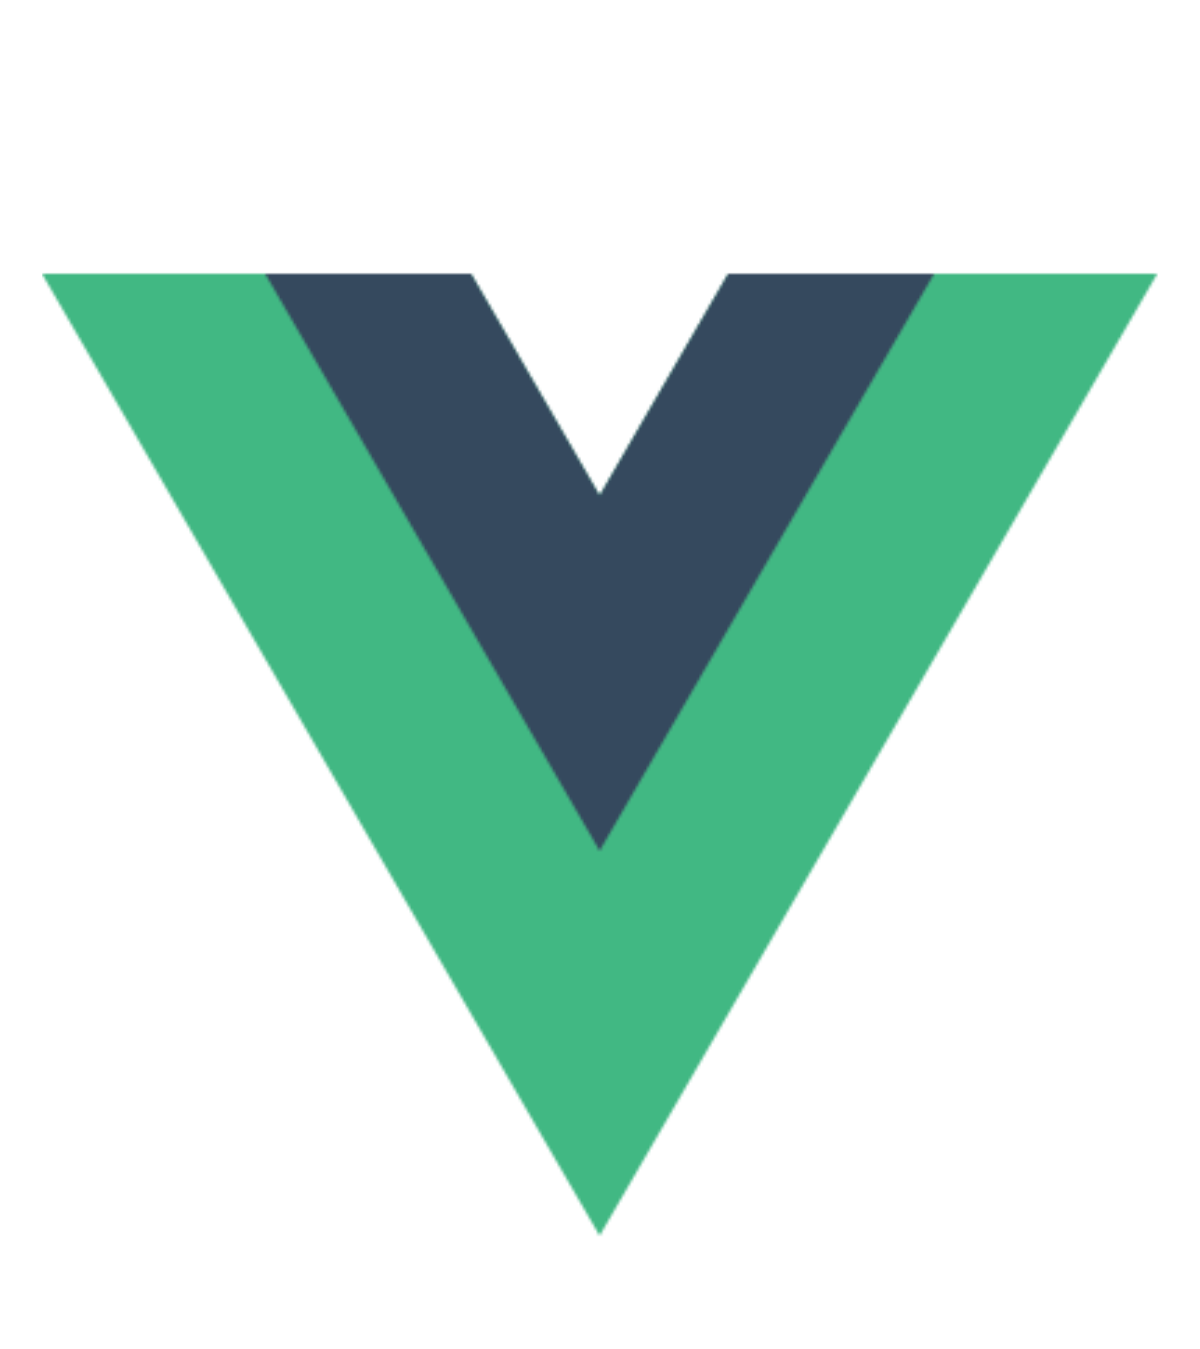 code examples and answer to questions in VueJs framework in JavaScript